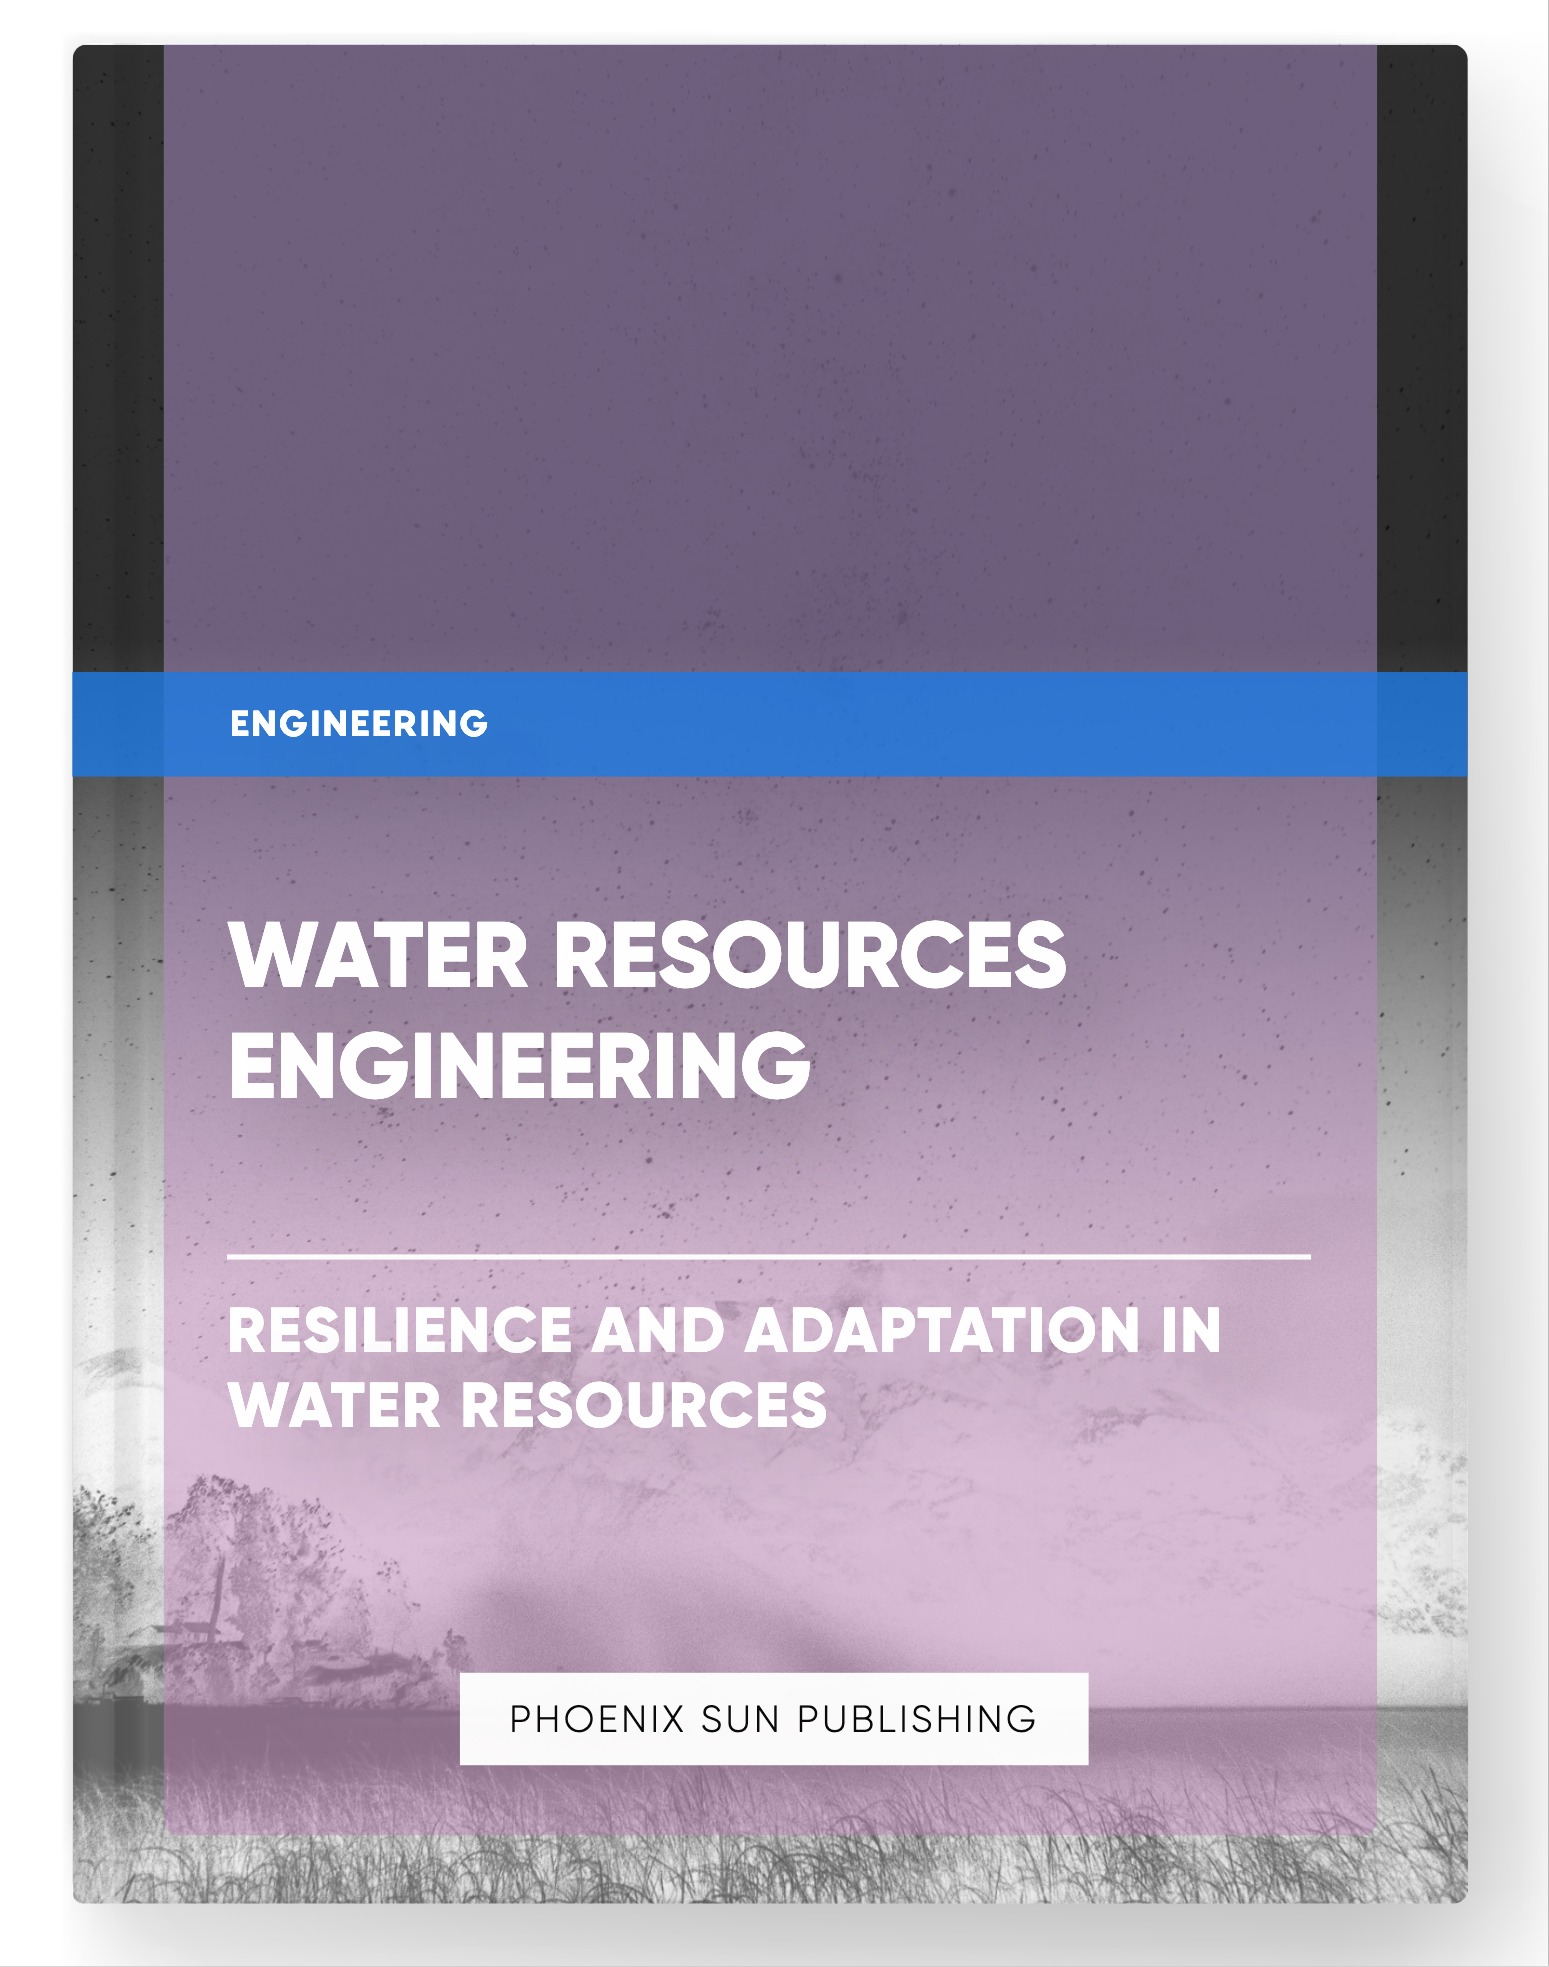 Water Resources Engineering – Resilience and Adaptation in Water Resources